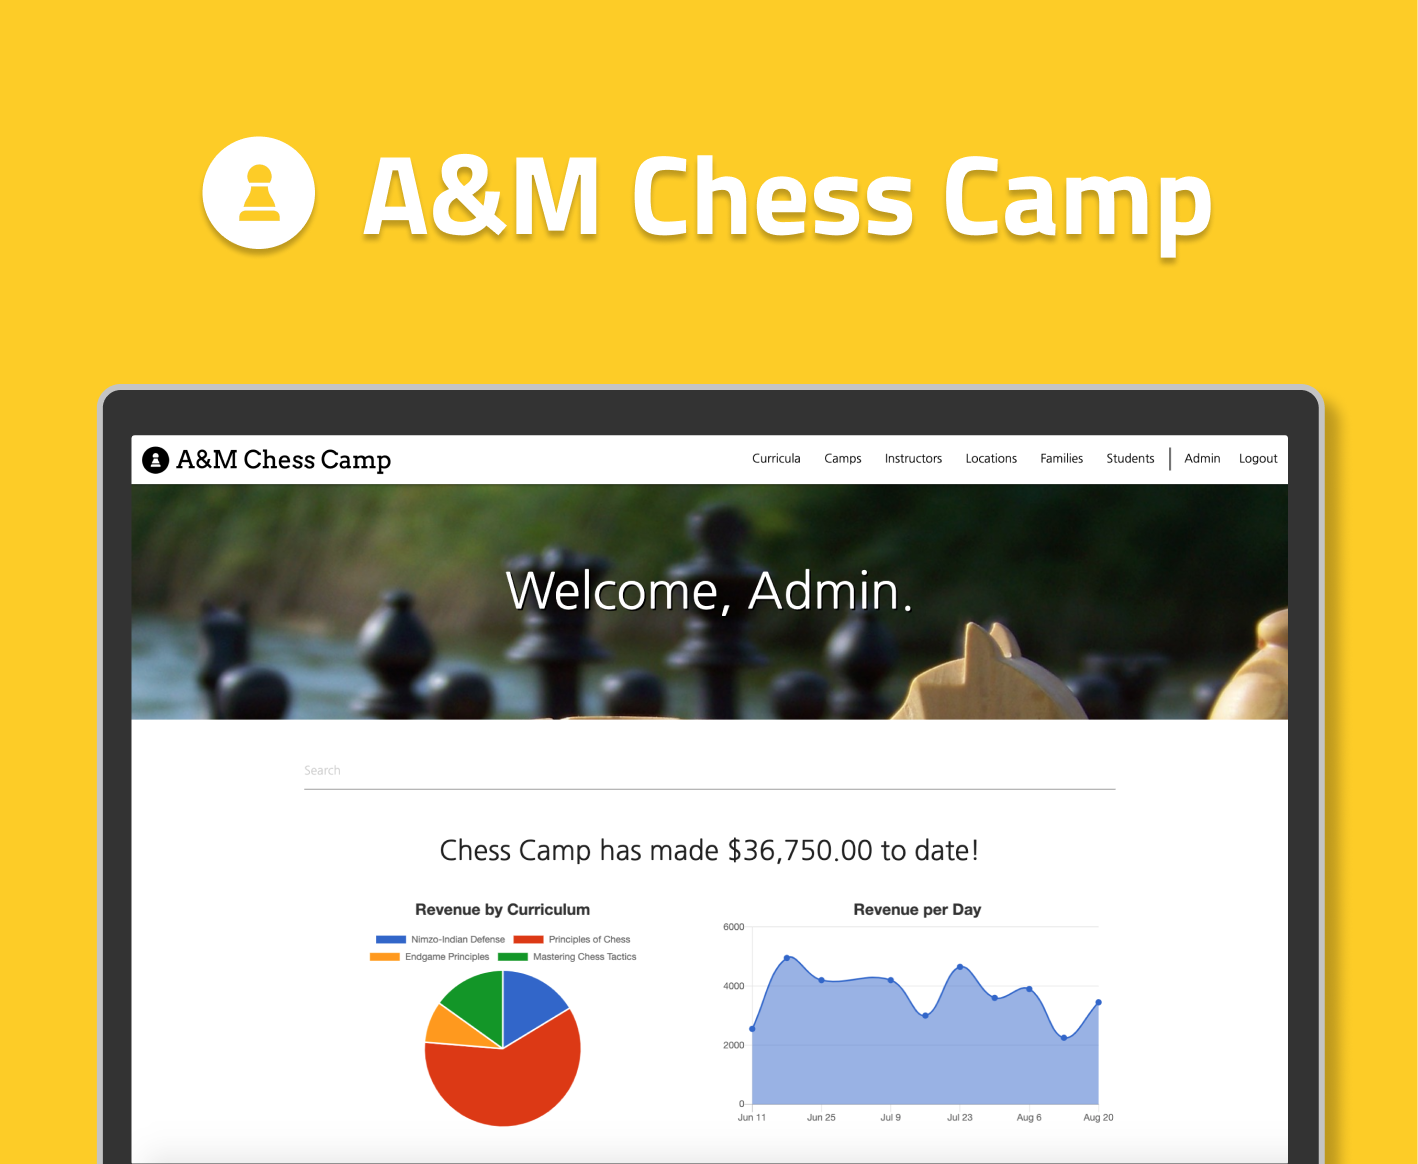 A&M Chess Camp